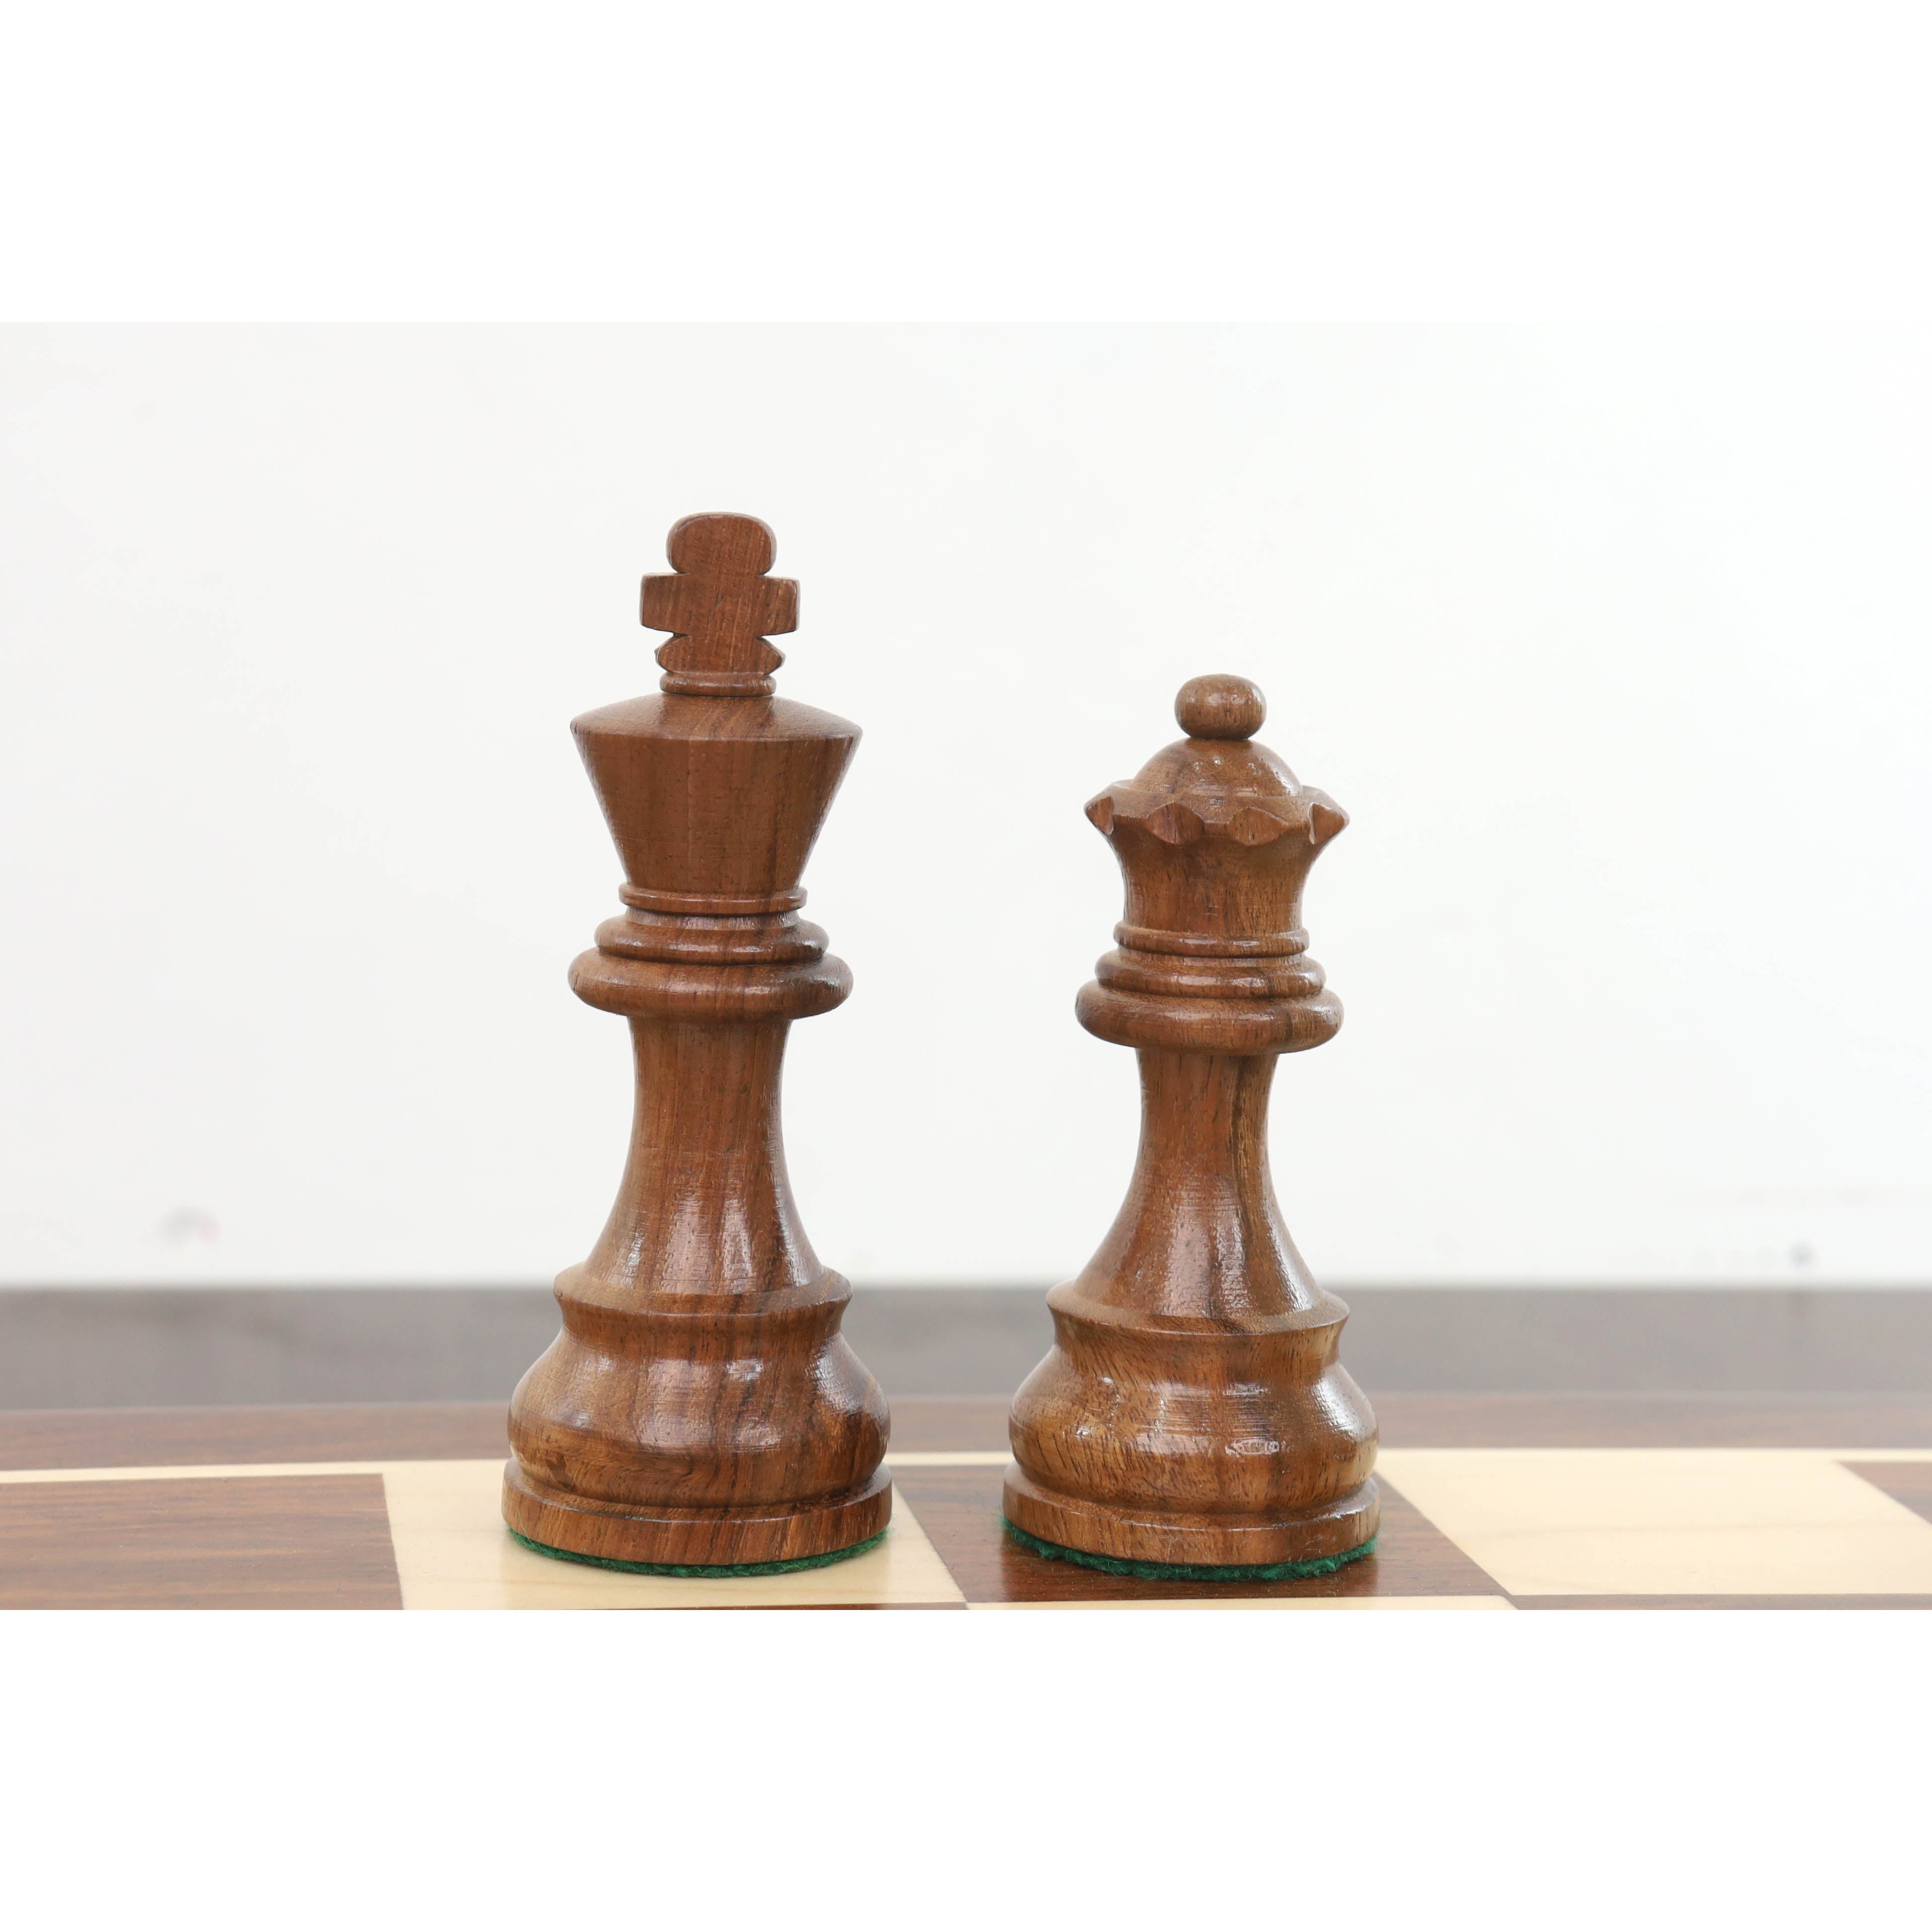 3.9" Tournament Chess Pieces Only Set - Golden Rosewood with Extra Queens